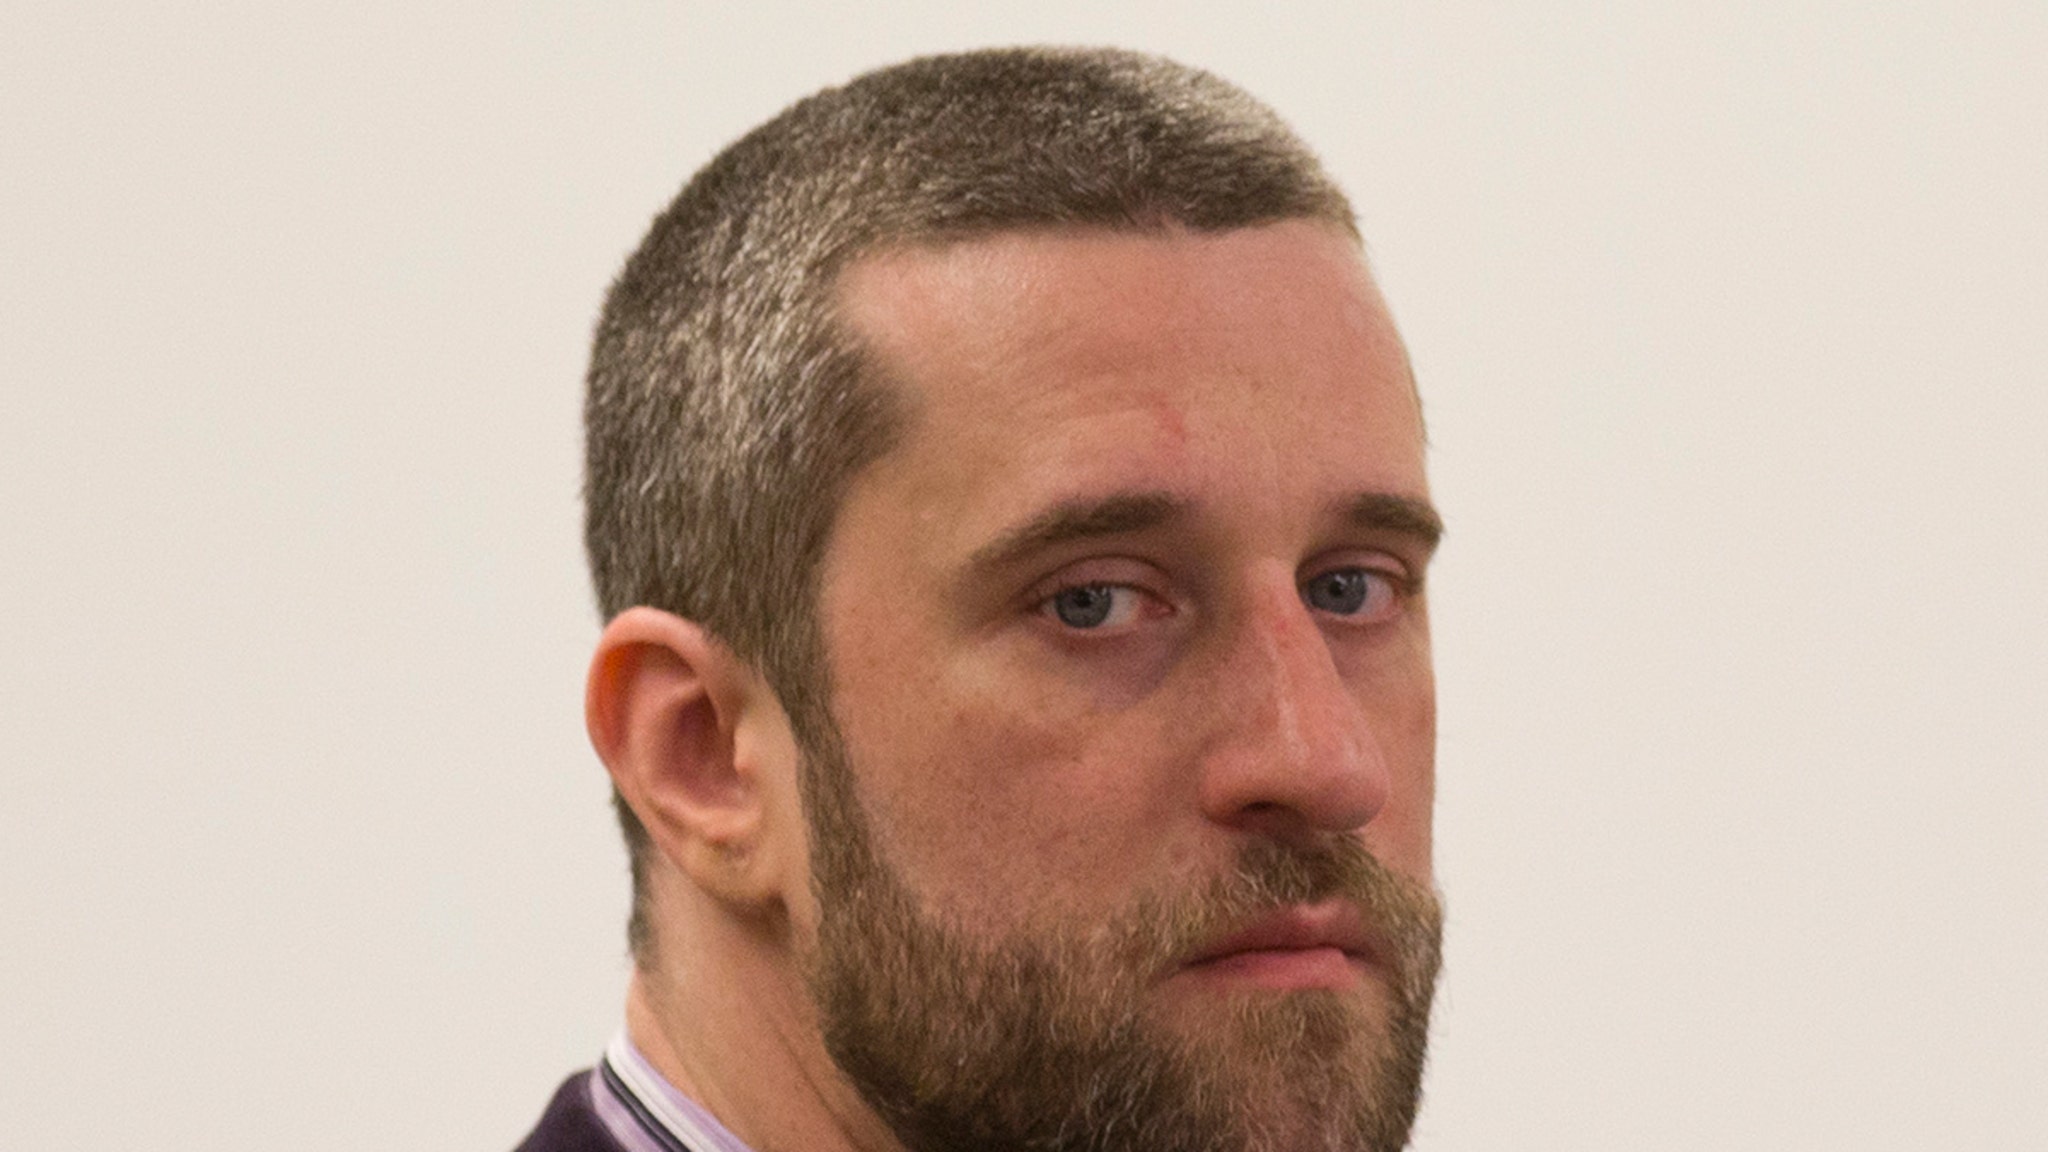 Dustin Diamond has stage 4 small cell carcinoma, concludes first round of chemotherapy